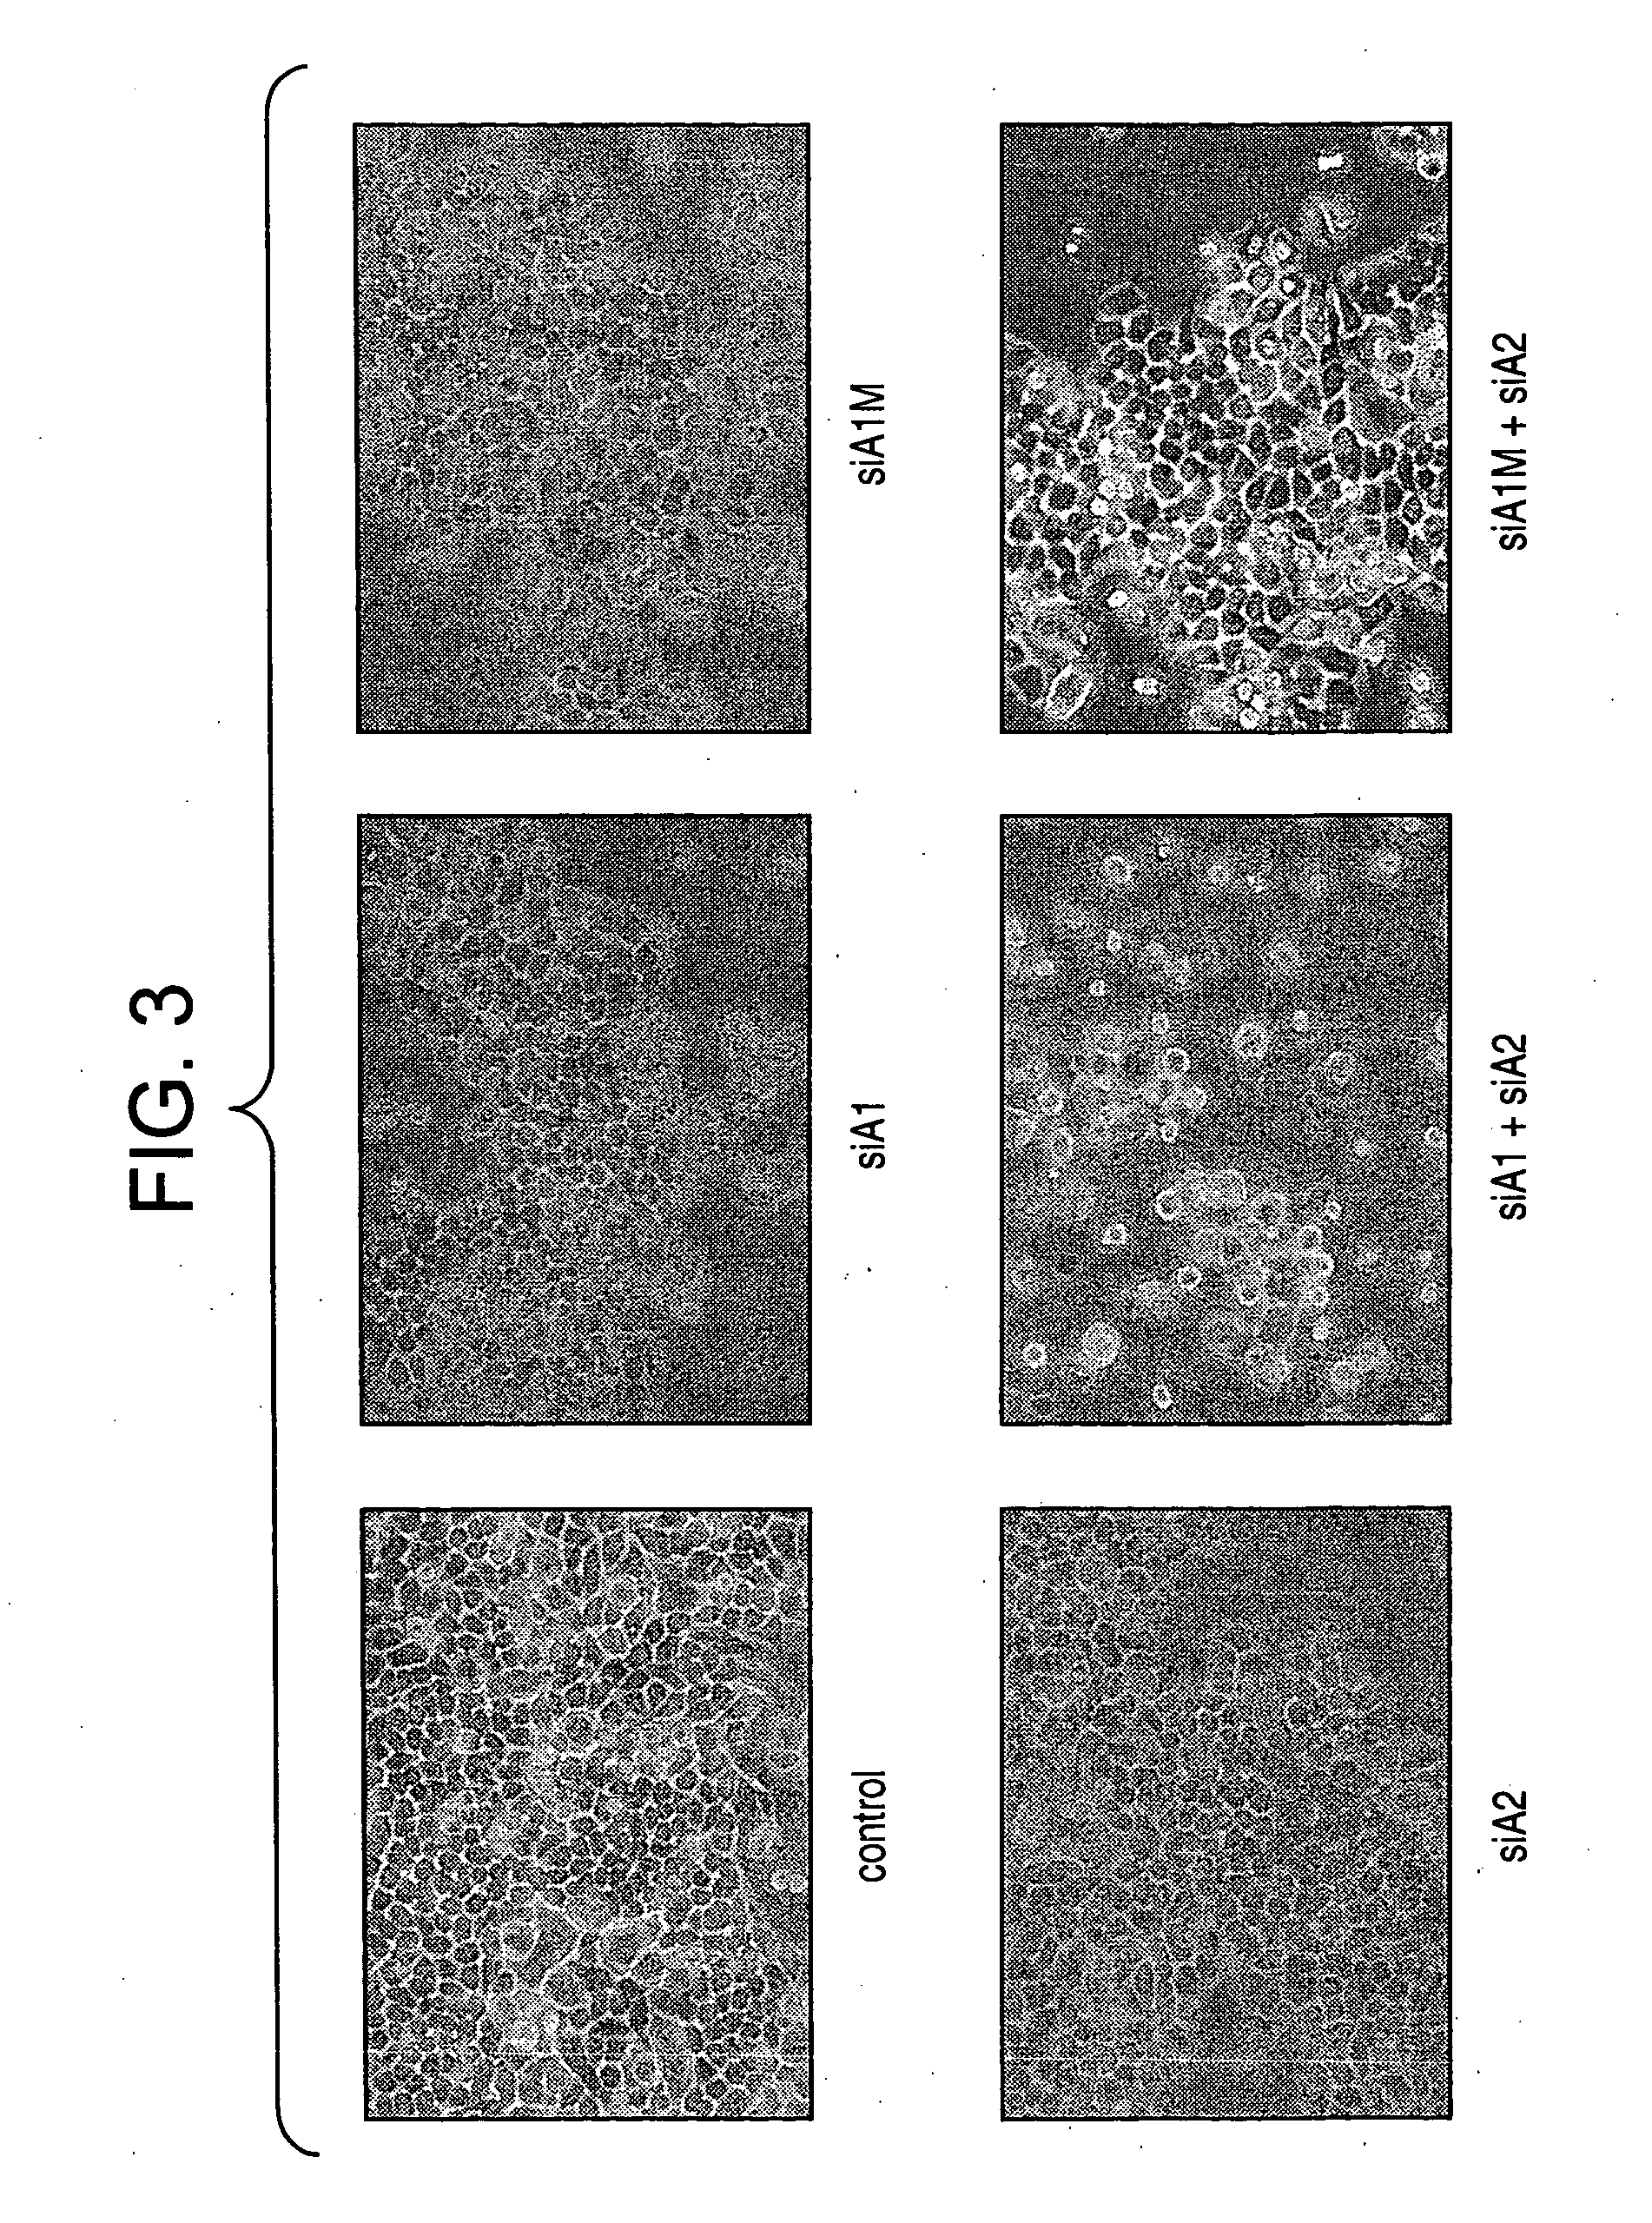 Methods and compositions relating to hnRNP A1, A1B, A2, and B1 nucleic acid molecules